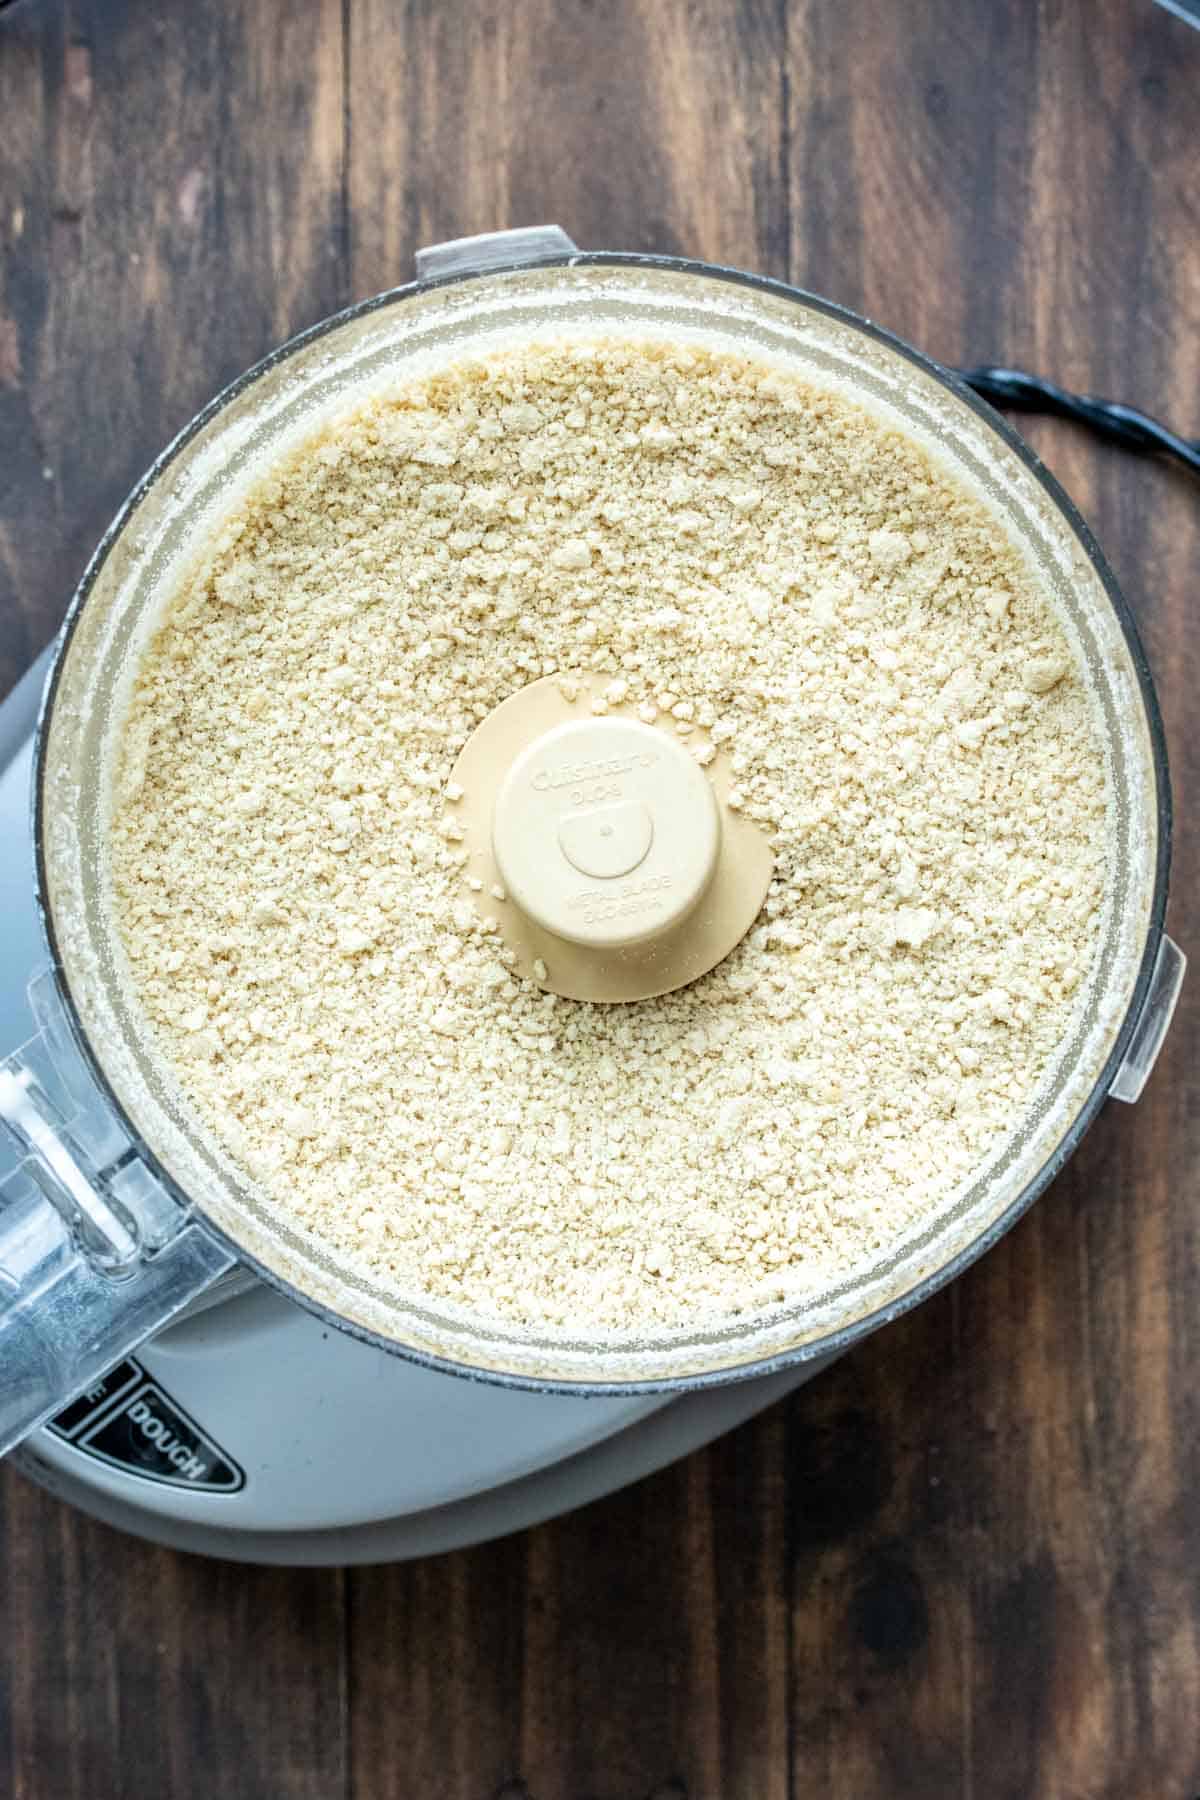 Pulsed cashews in a food processor being made into vegan Parmesan.